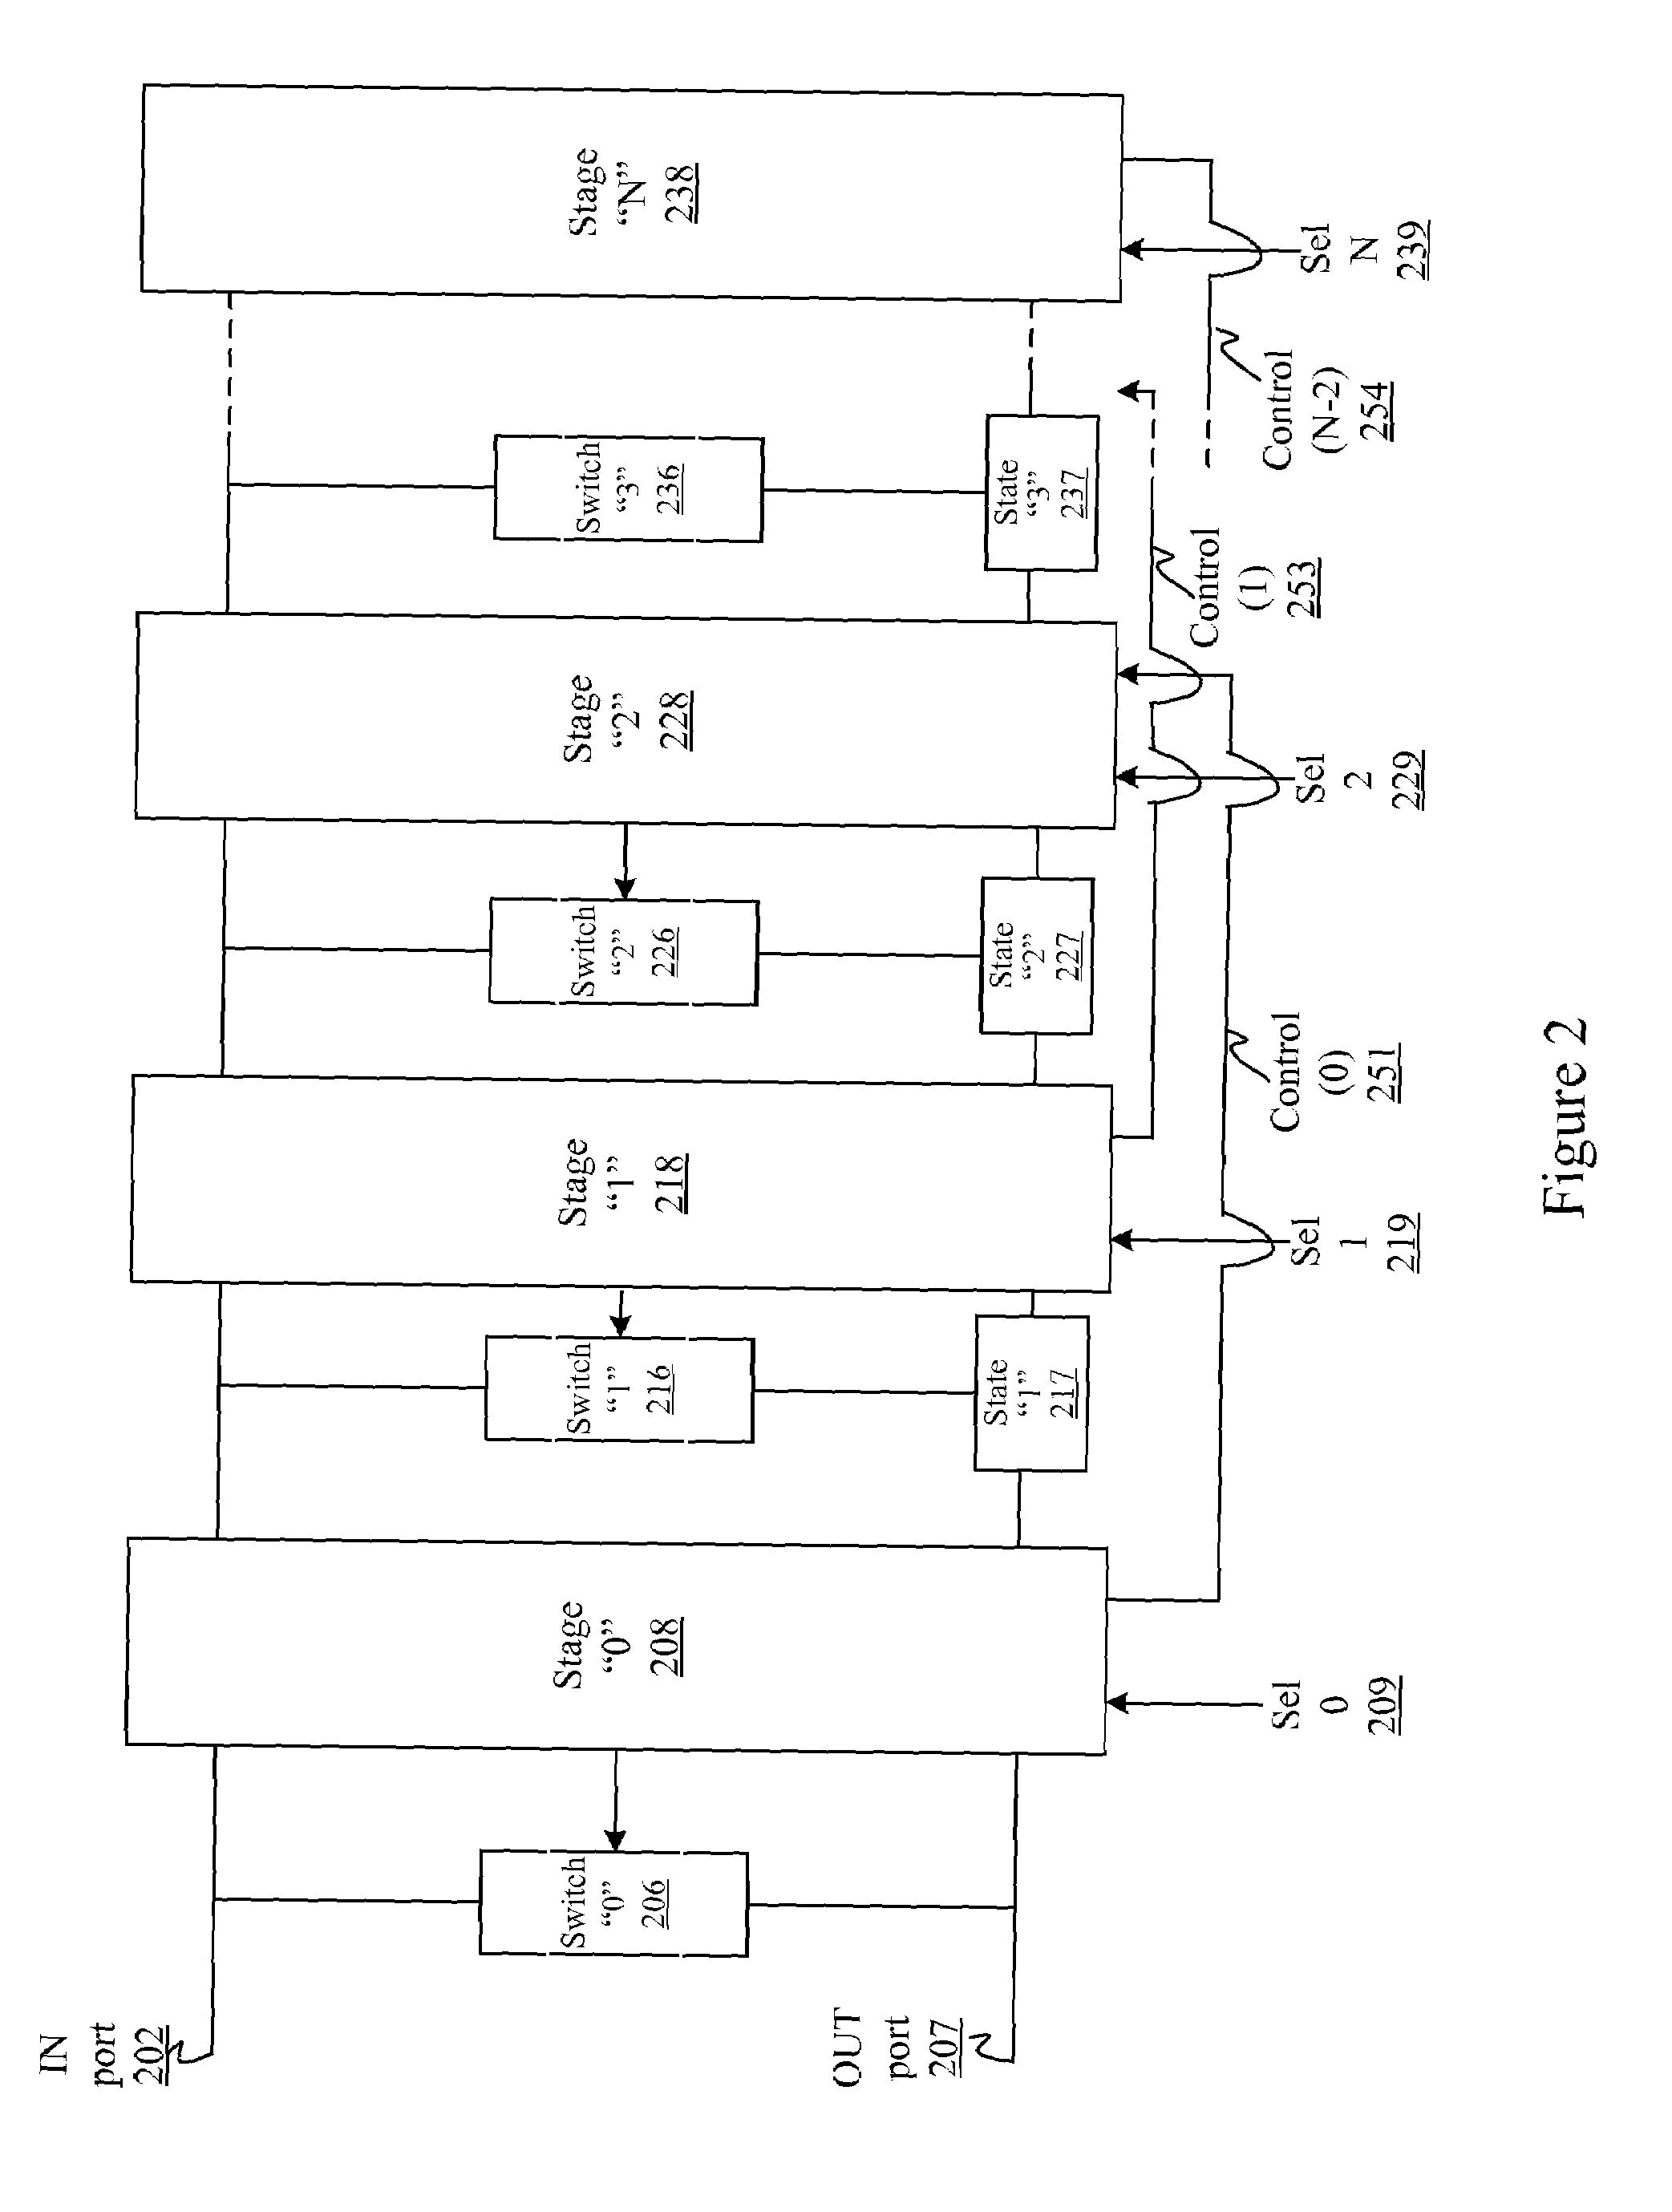 Low-power, programmable multi-stage delay cell